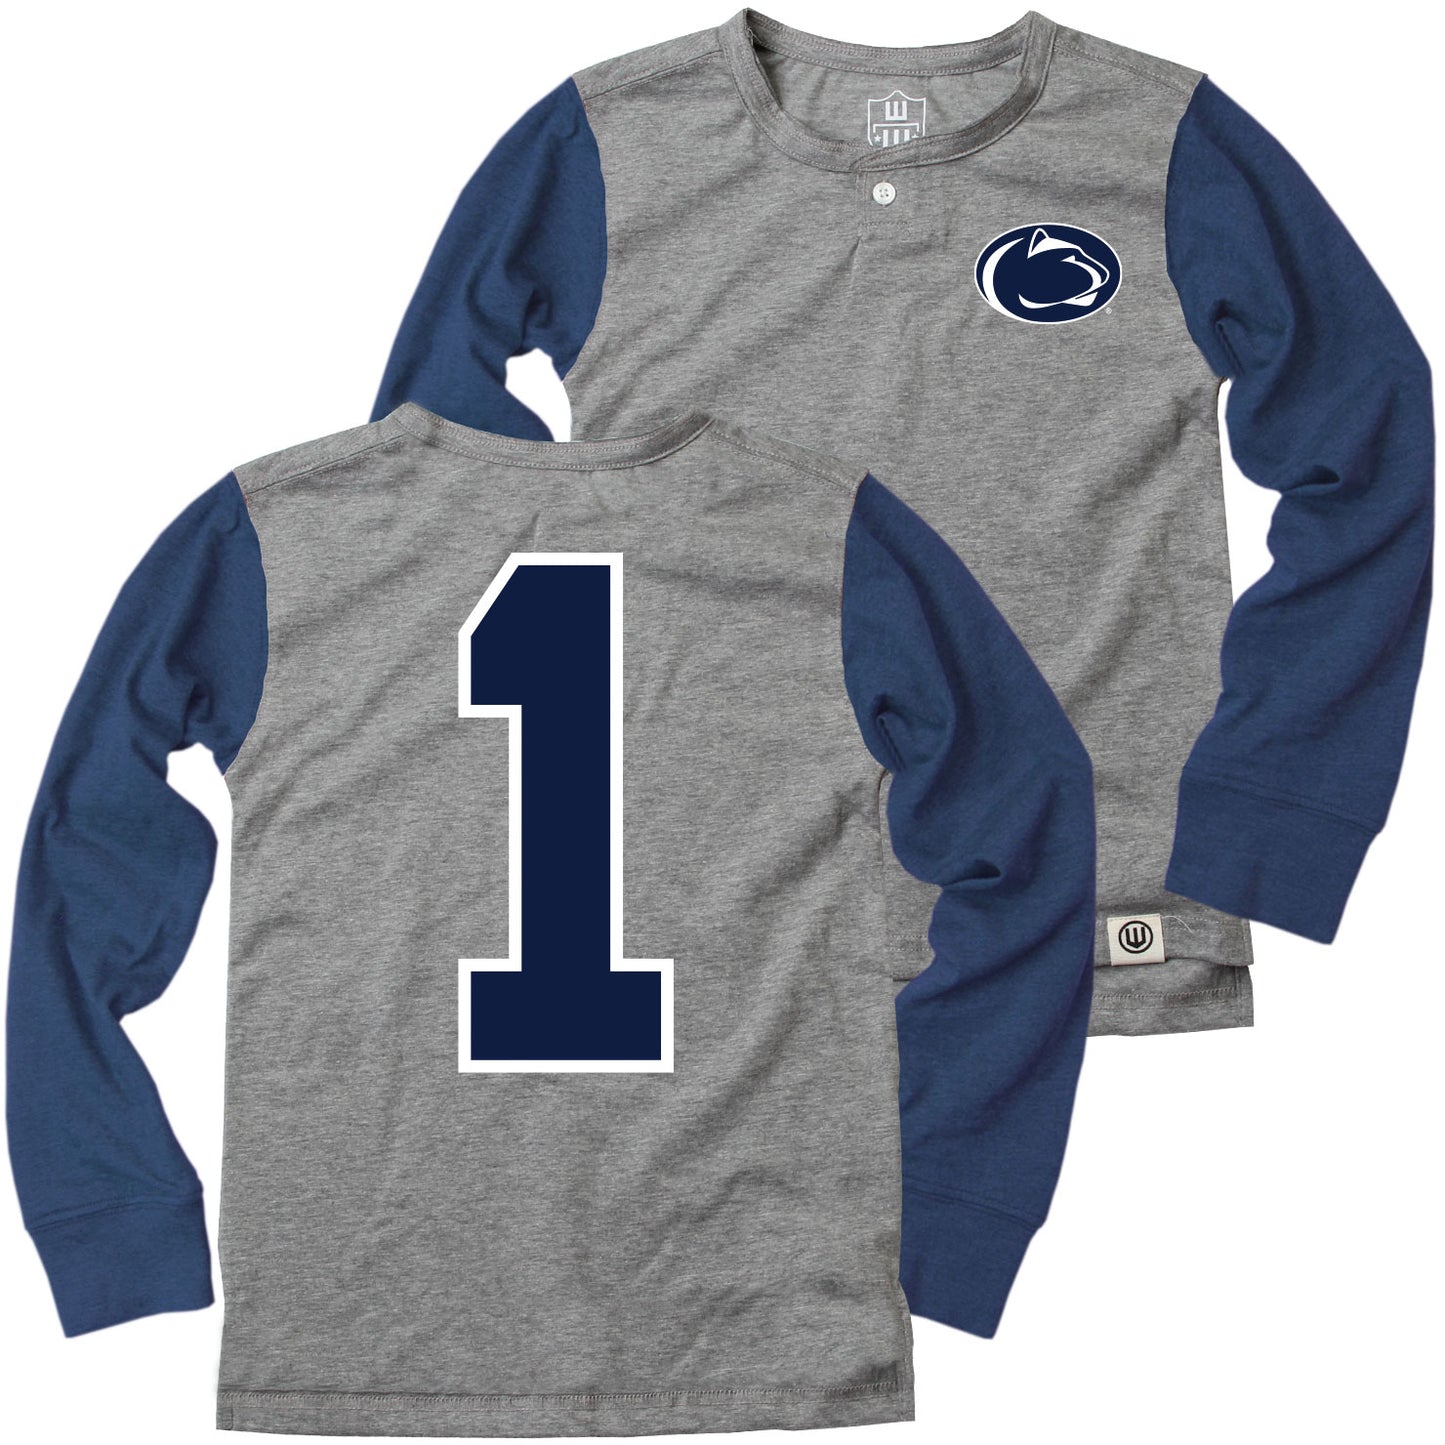 Penn State Nittany Lions Wes and Willy Boys Long Sleeve Henley Shirt